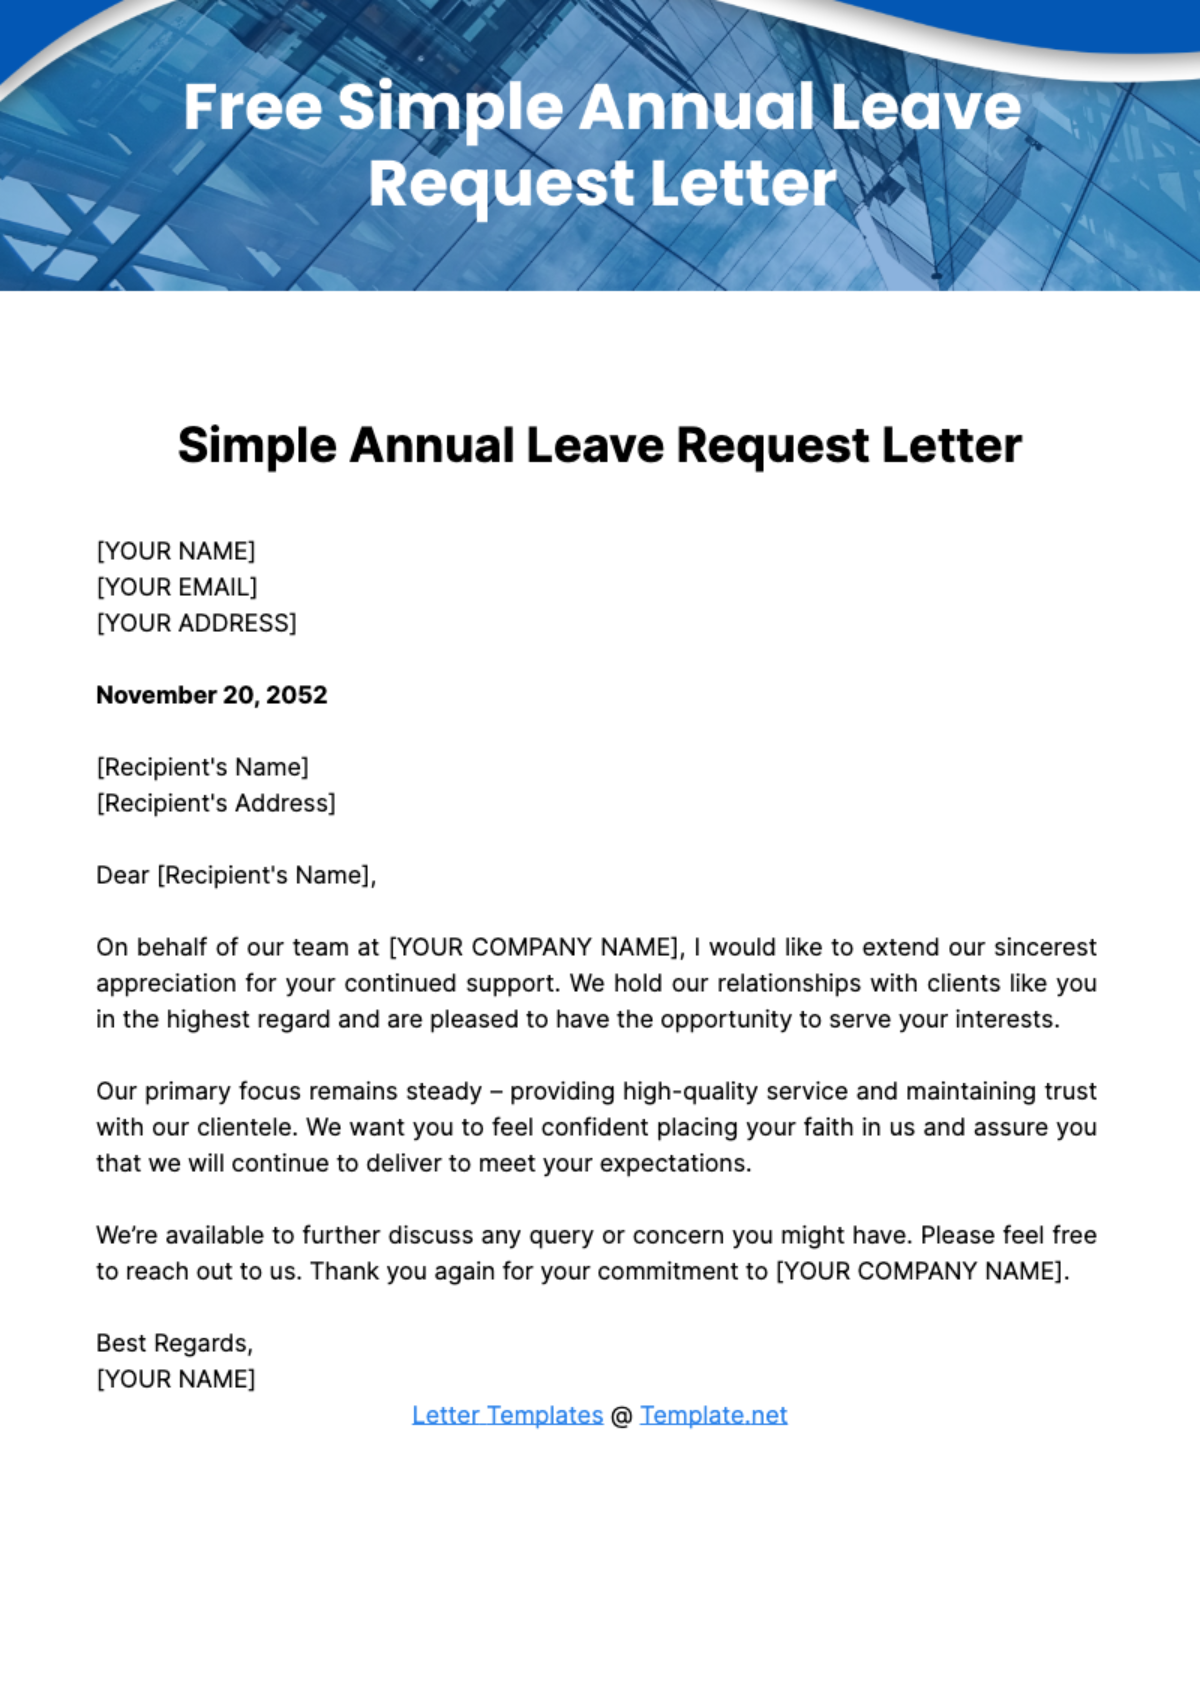 Free Simple Annual Leave Request Letter Template